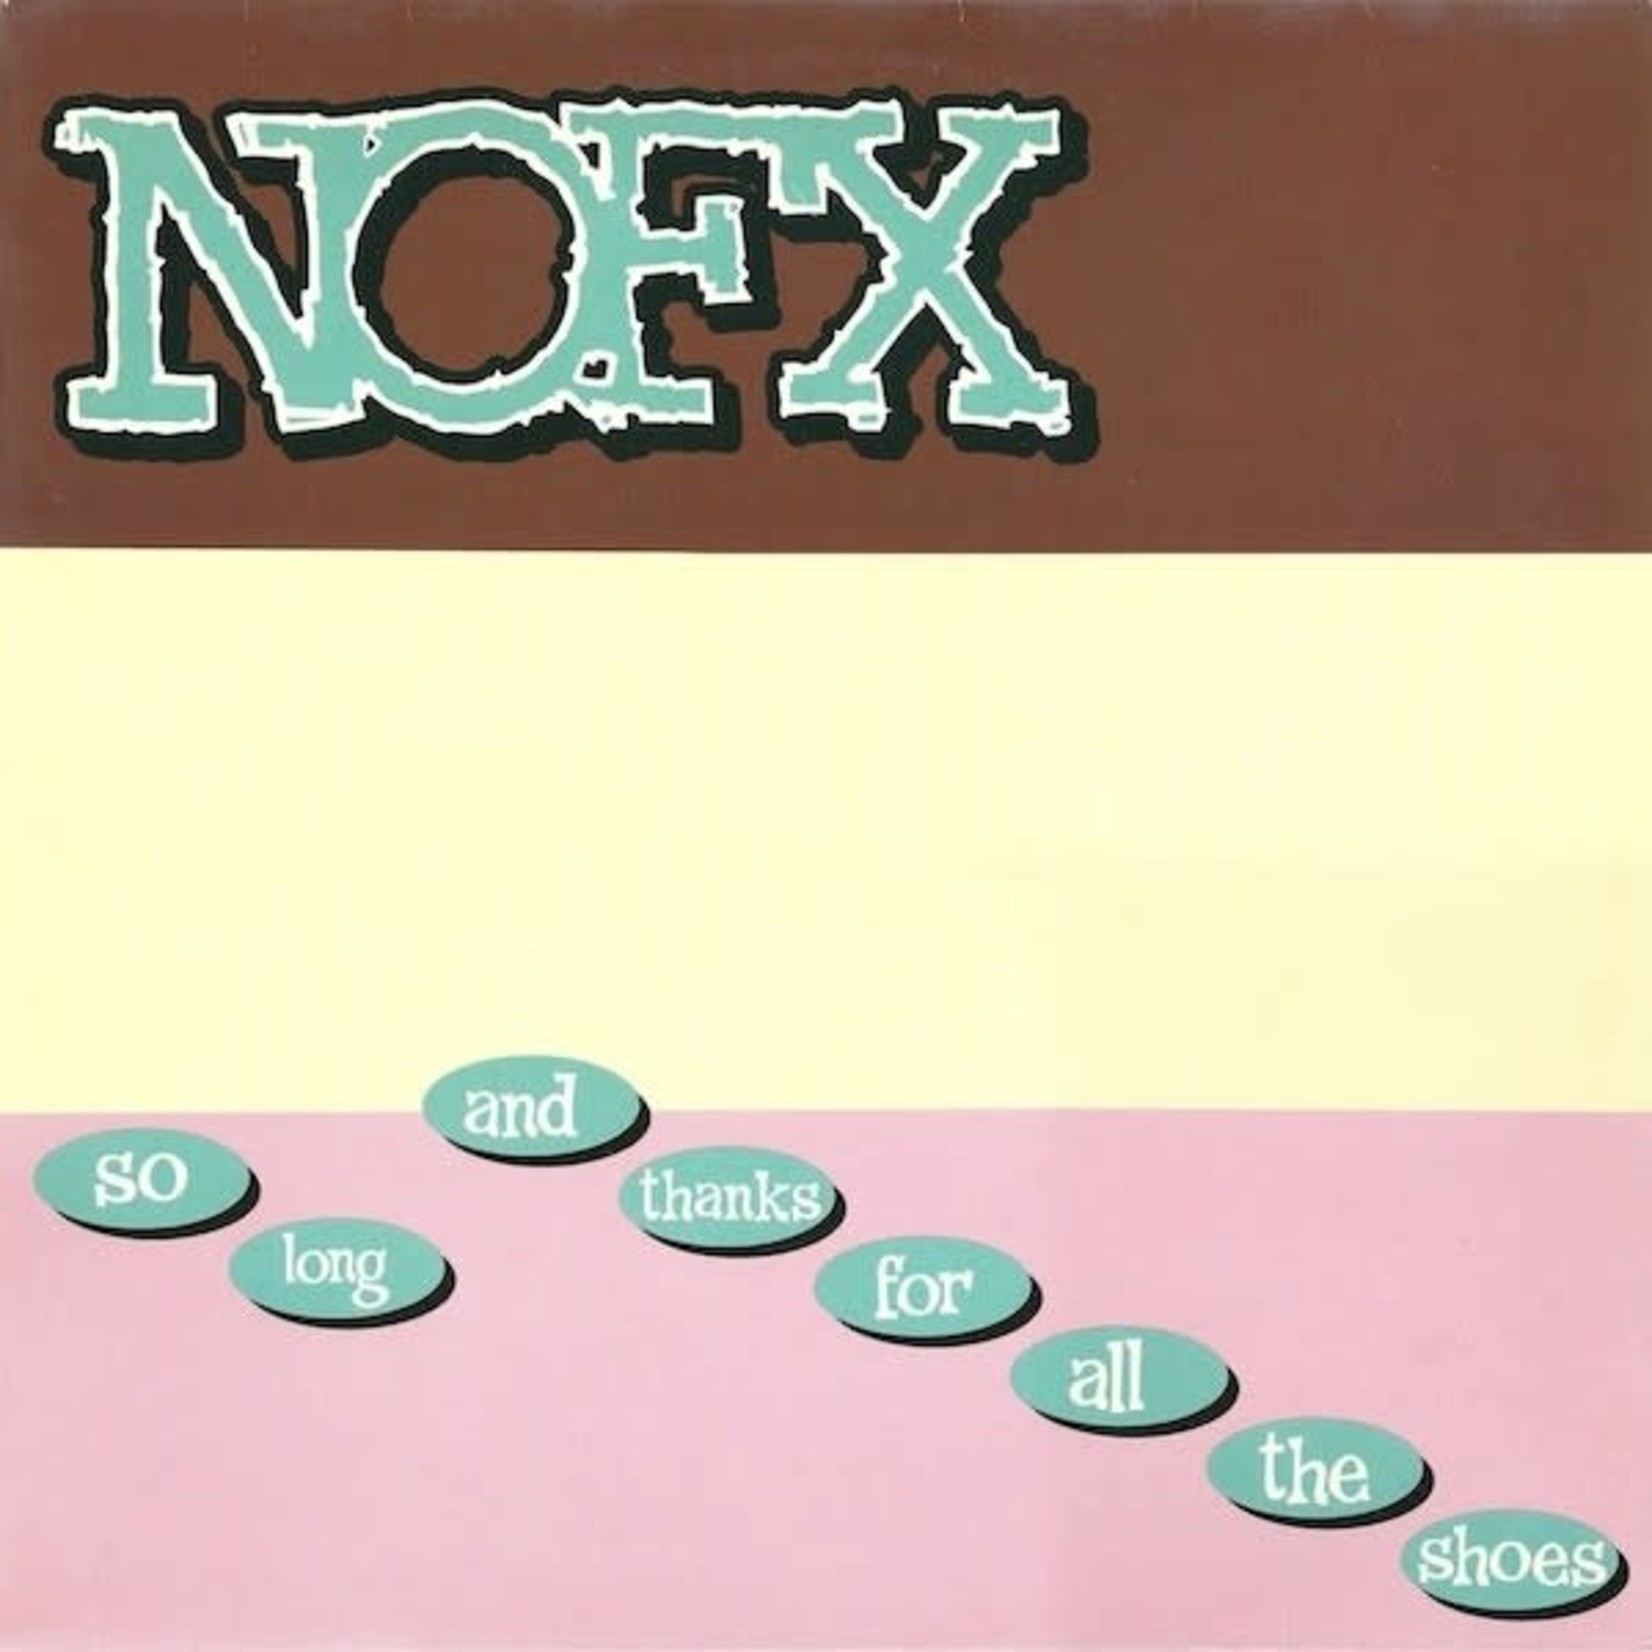 [New] NOFX - So Long & Thanks For All the Shoes